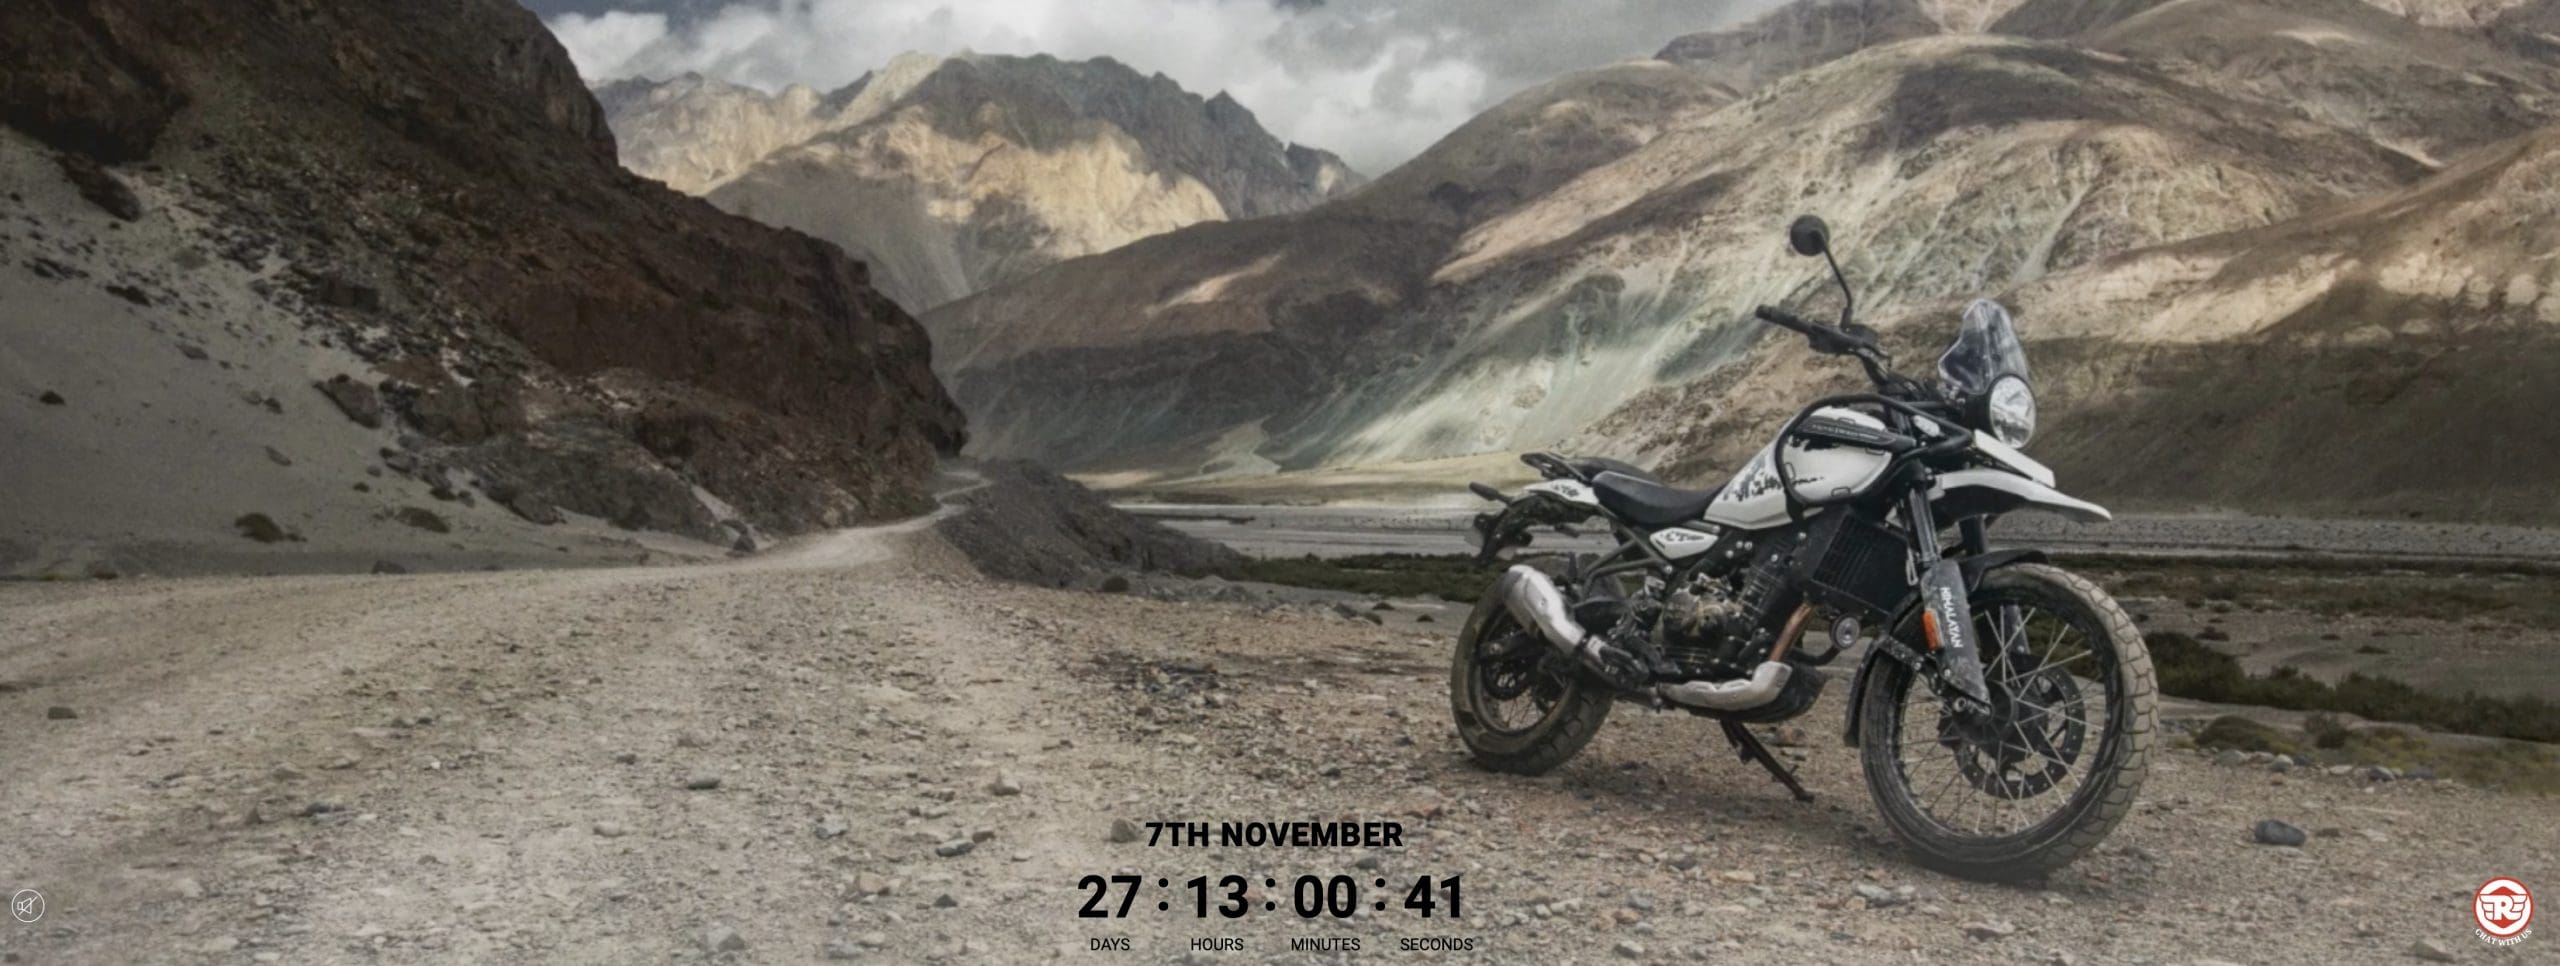 A view of Royal Enfield's soon-to-debut Himalayan 450. Media sourced from Royal Enfield's social media page.